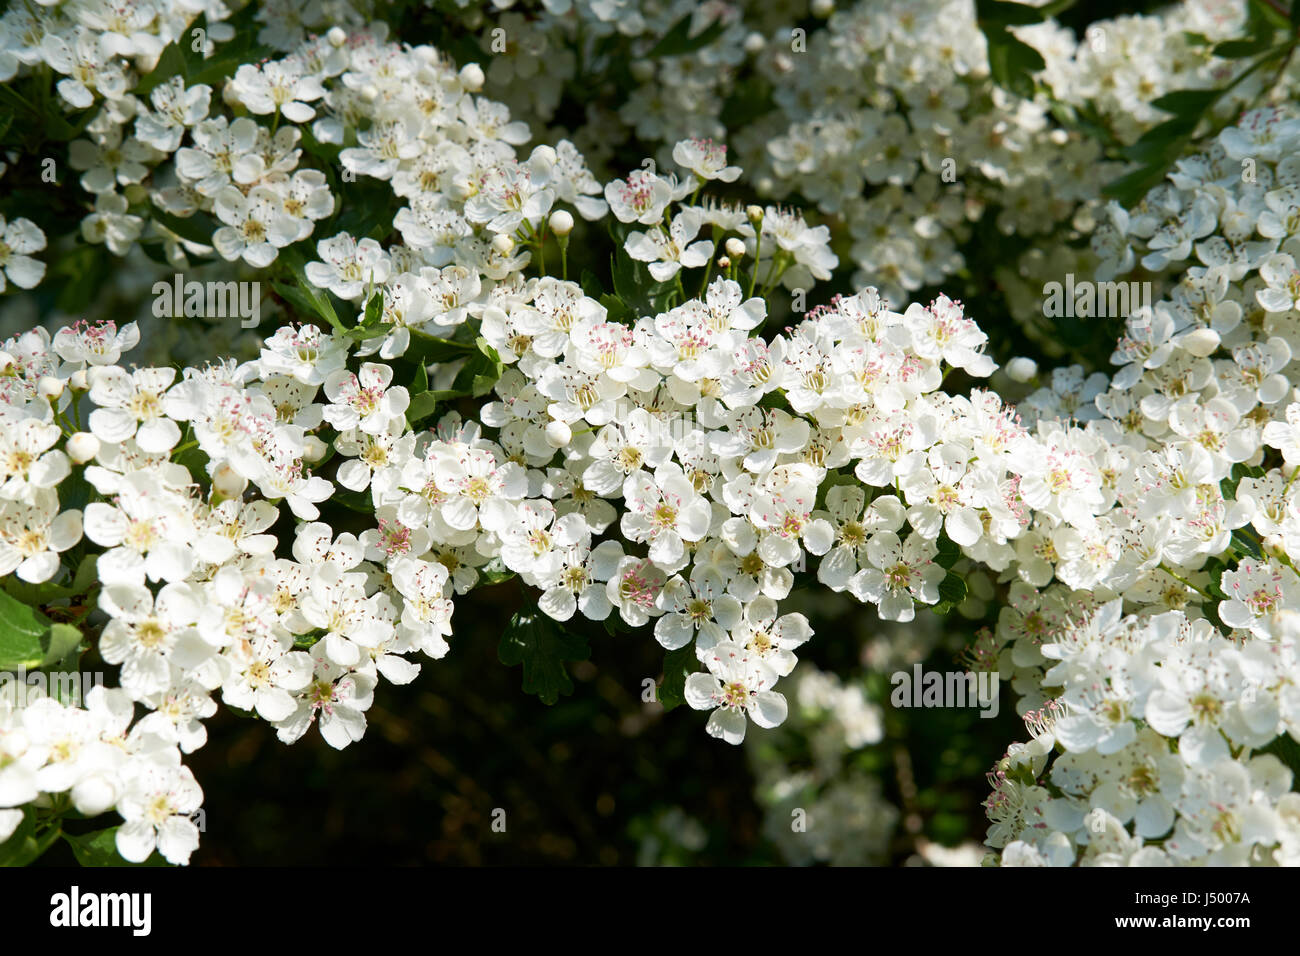 White blossom of the Hawthorn (Crategus monogyna) shrub, commonly found in hedgerows throughout the UK. Stock Photo